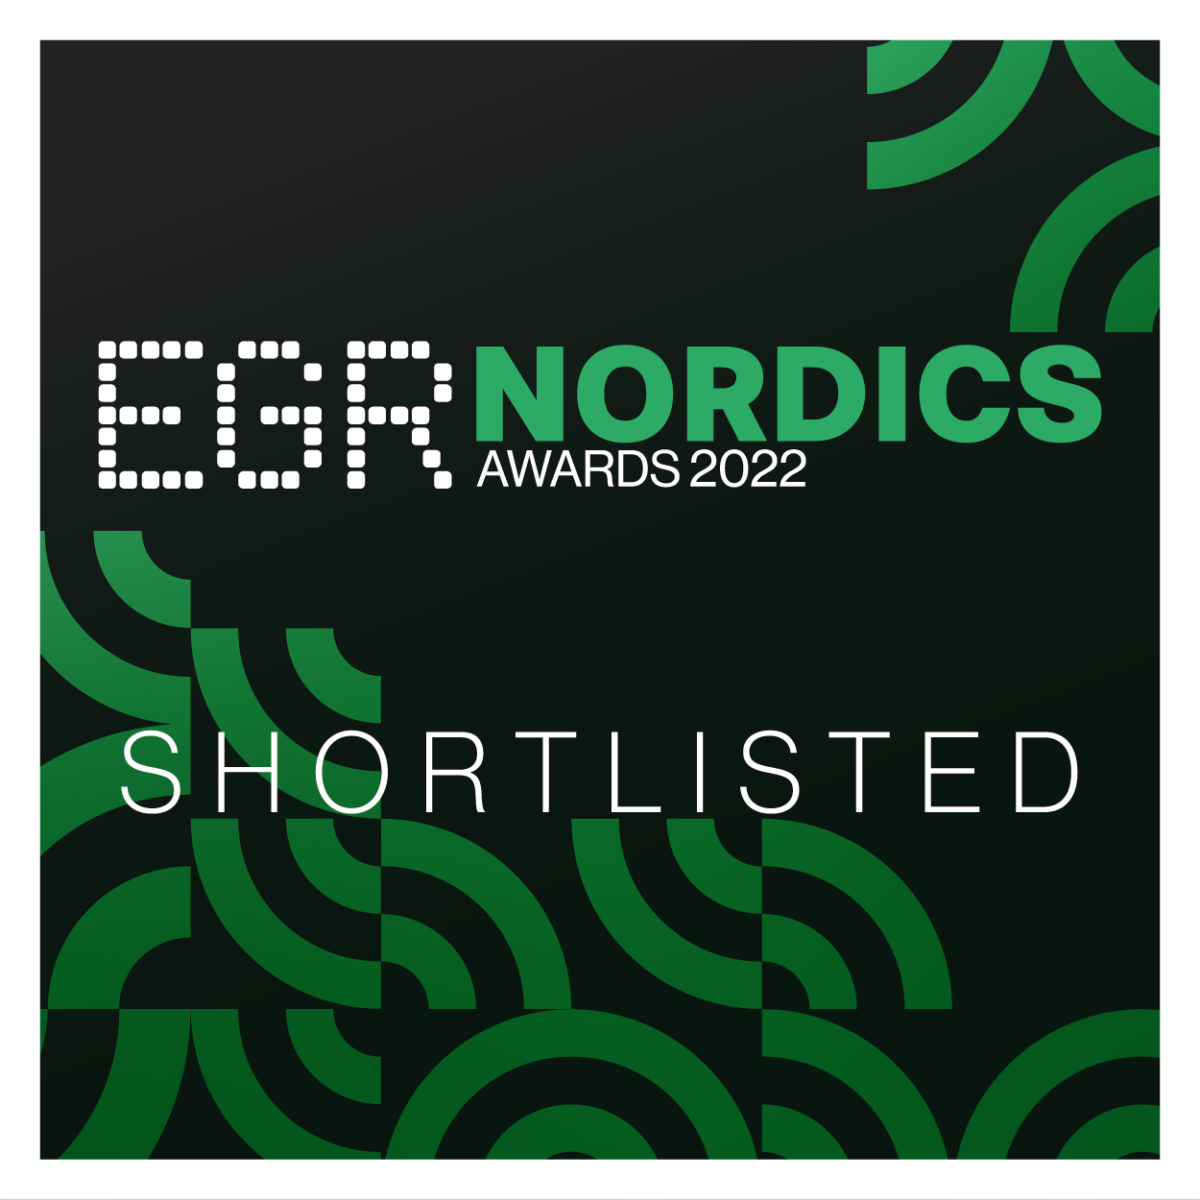 Scout Gaming shortlisted 3 times at the 2022 EGR Nordics Awards